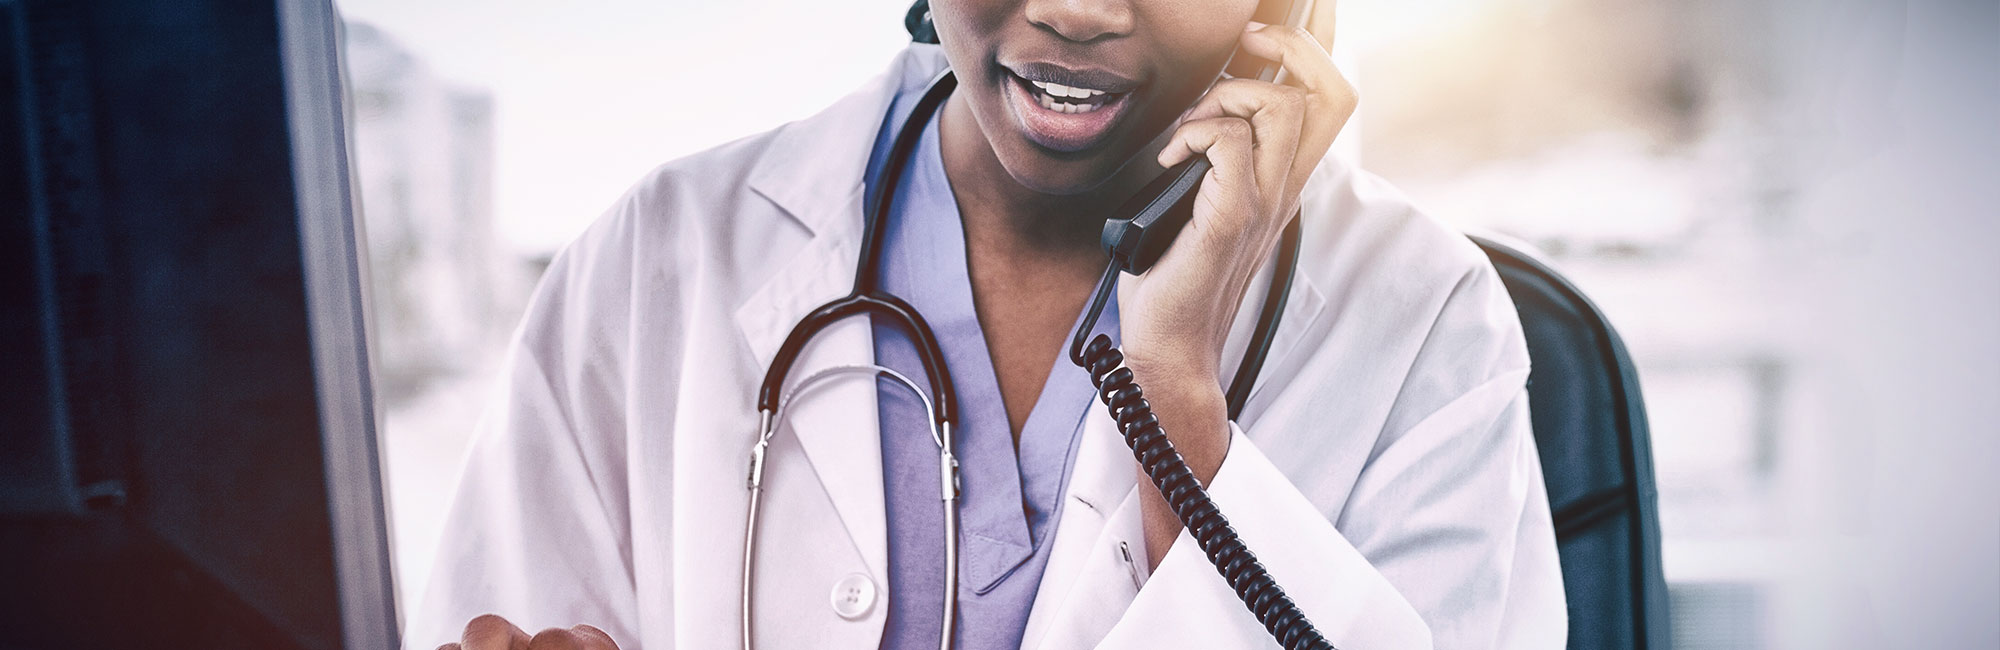 Answering Service To Keep Up With Medical Practice